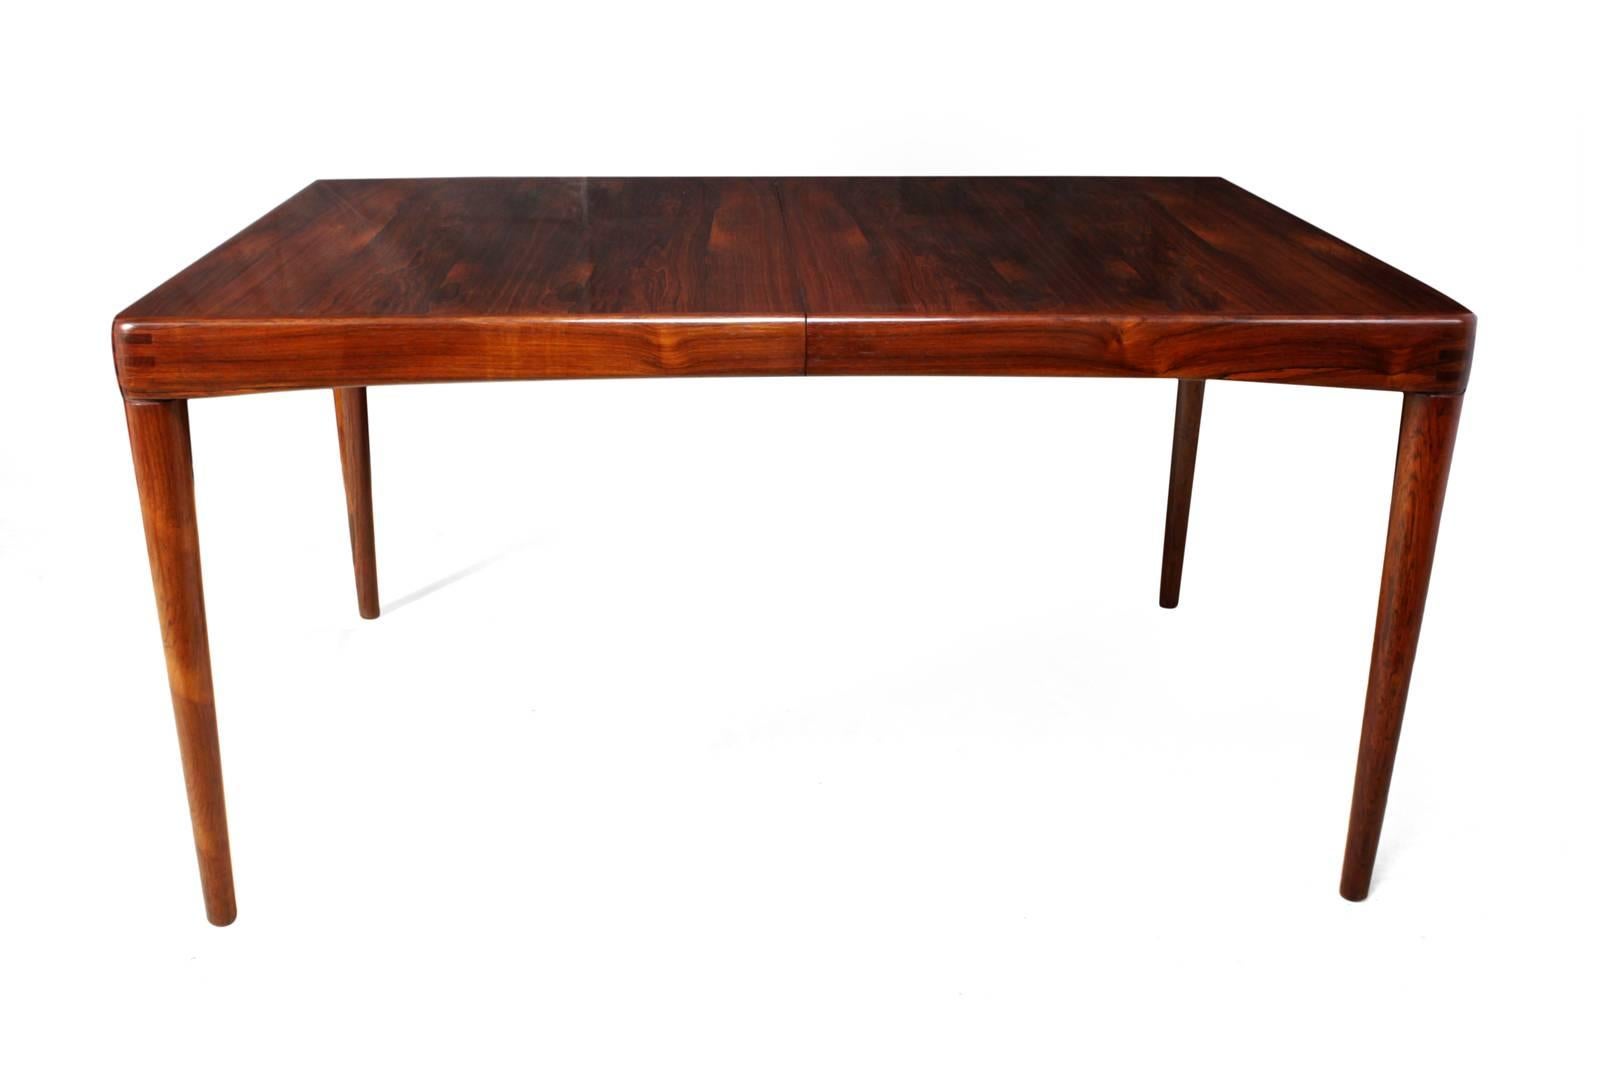 Midcentury table in rosewood by Bramin
A rosewood dining table produced in Denmark in the mid-1960s by Bramin, the table will seat six people and extended will seat eight, the central leaf stores neatly underneath

Age: 1960

Style: Mid-Century